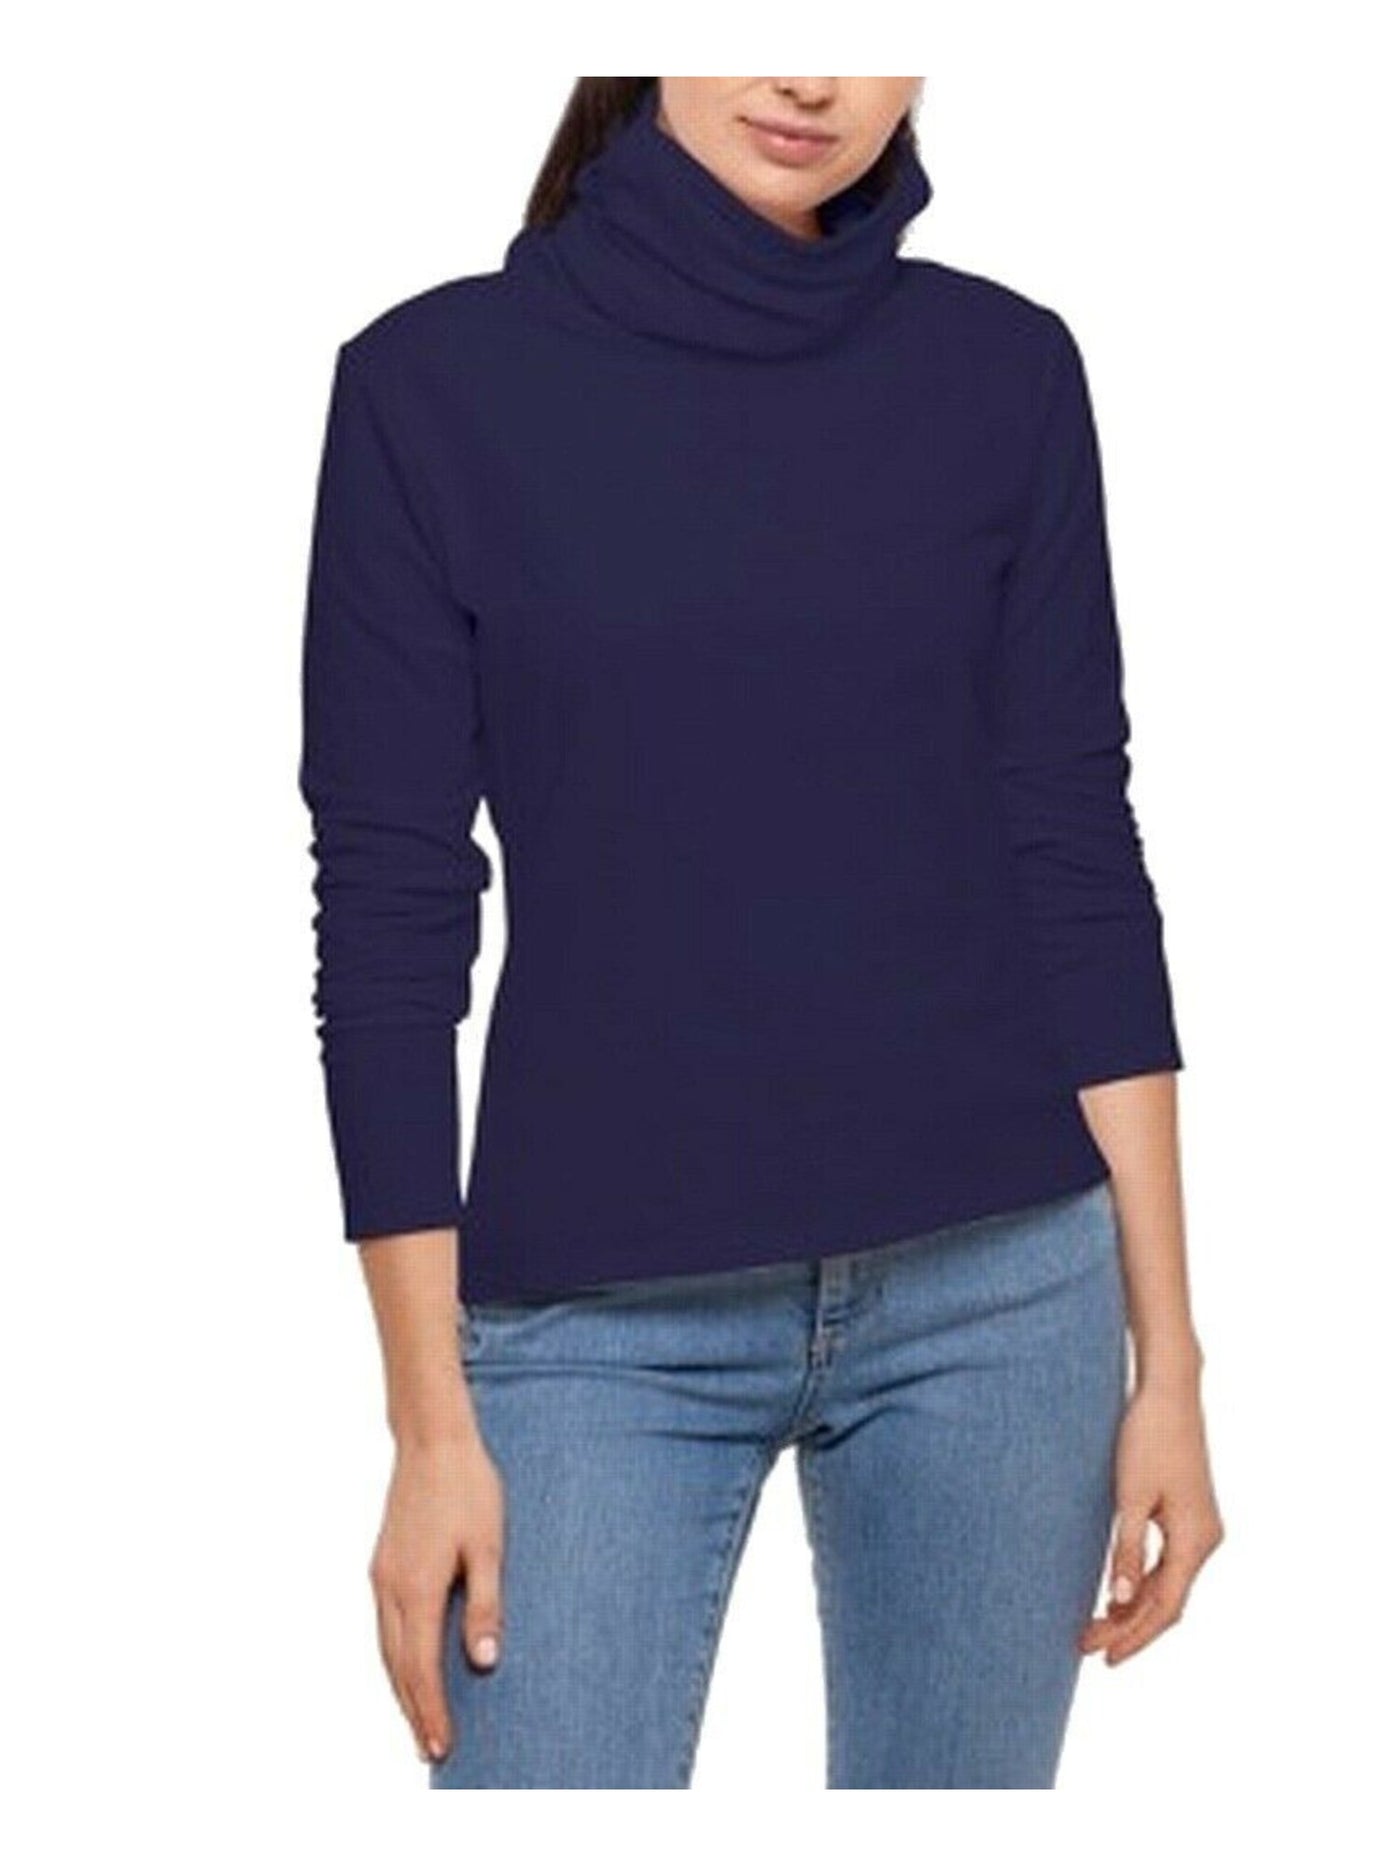 BAM BY BETSY & ADAM Womens Navy Cotton Blend Long Sleeve Turtle Neck Top S